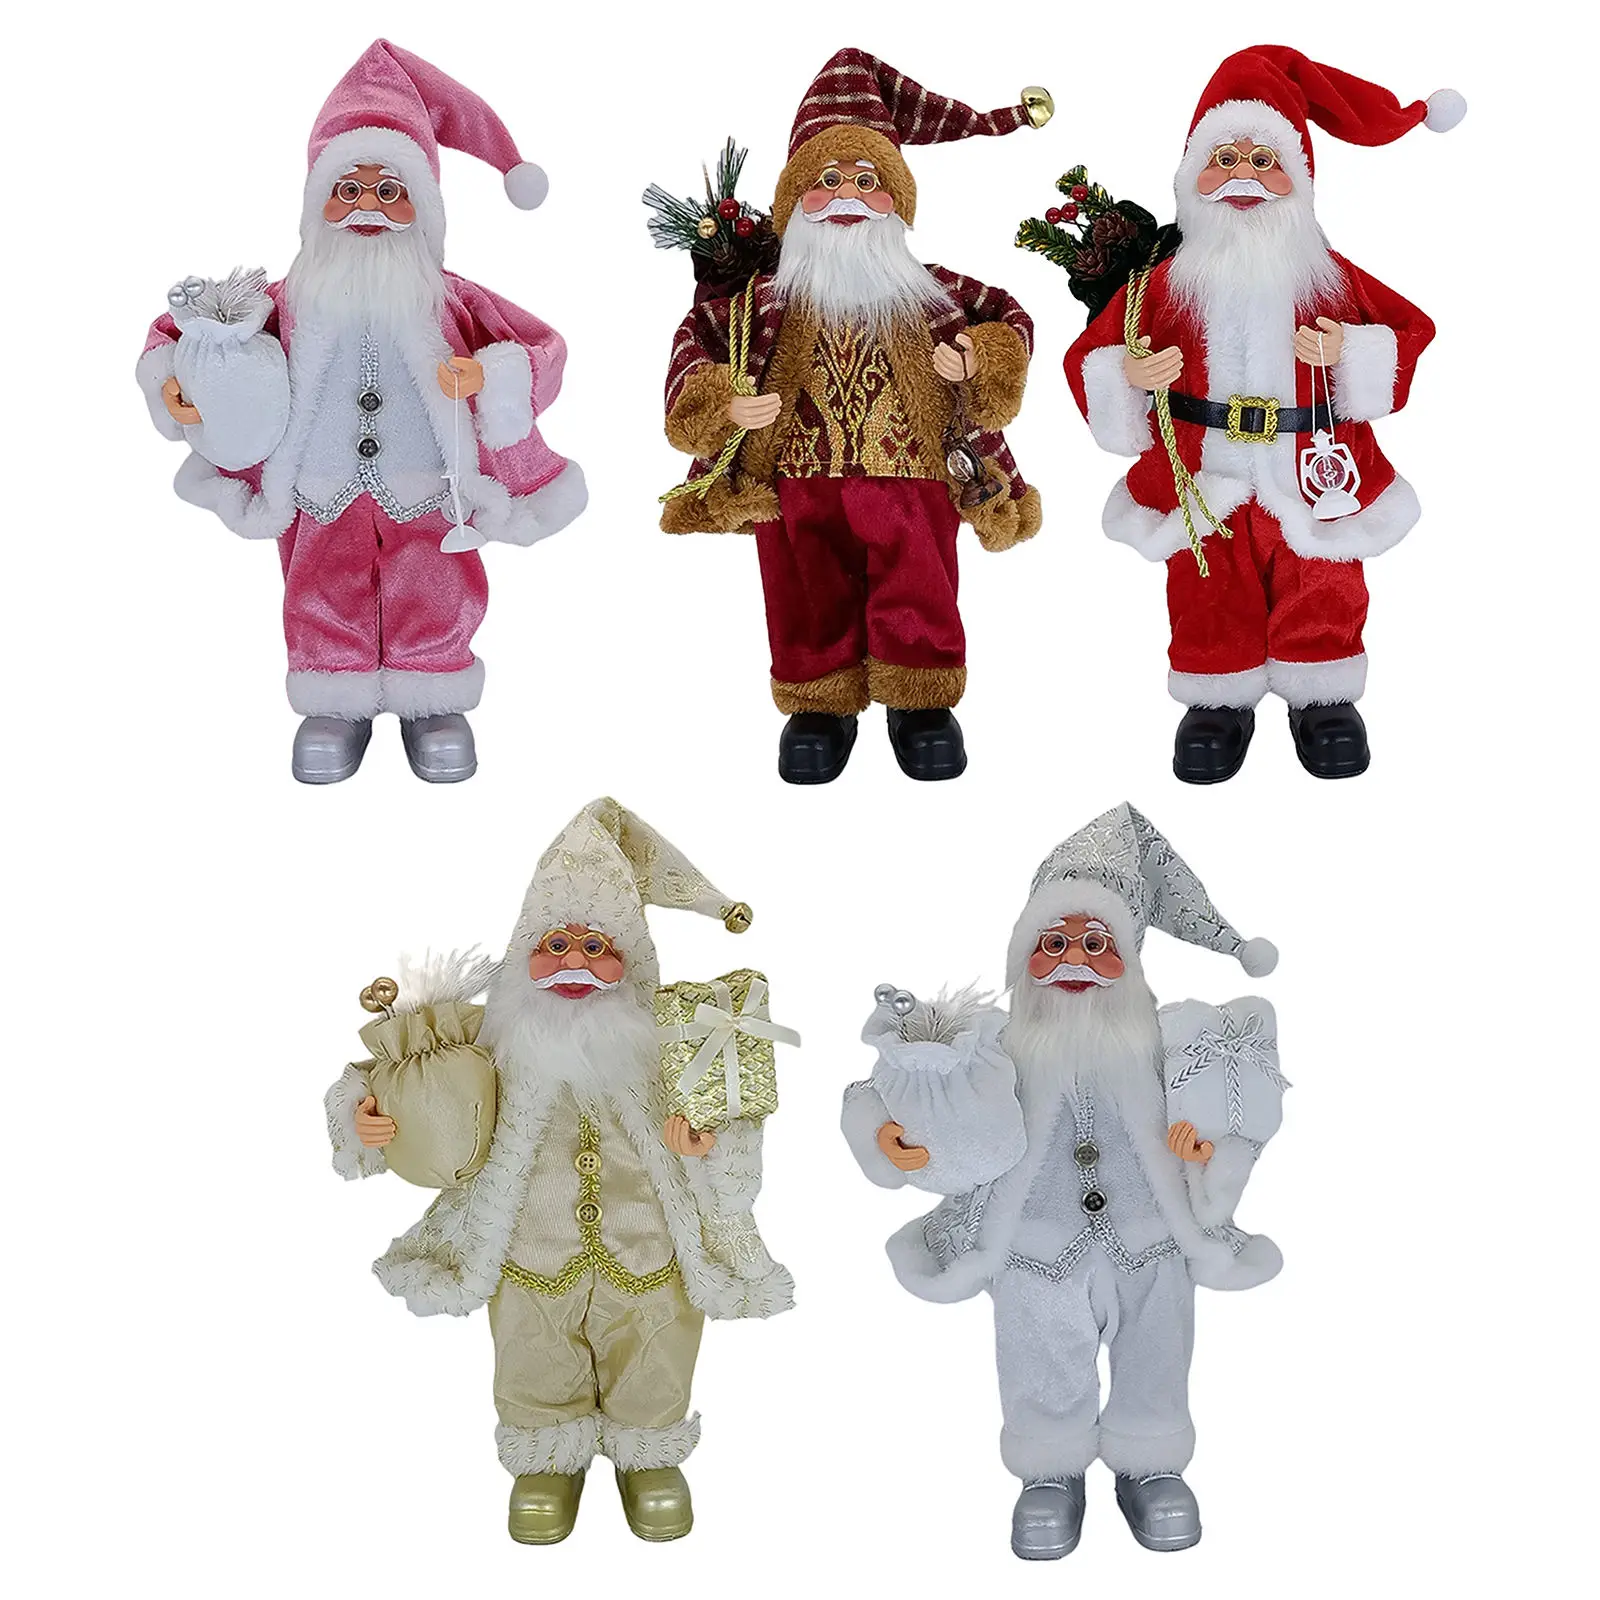 Delux Father Christmas Santa Claus Doll Statue Standing Figure Xmas Tabletop Desk Decoration Home Indoor Cabinet Ornaments